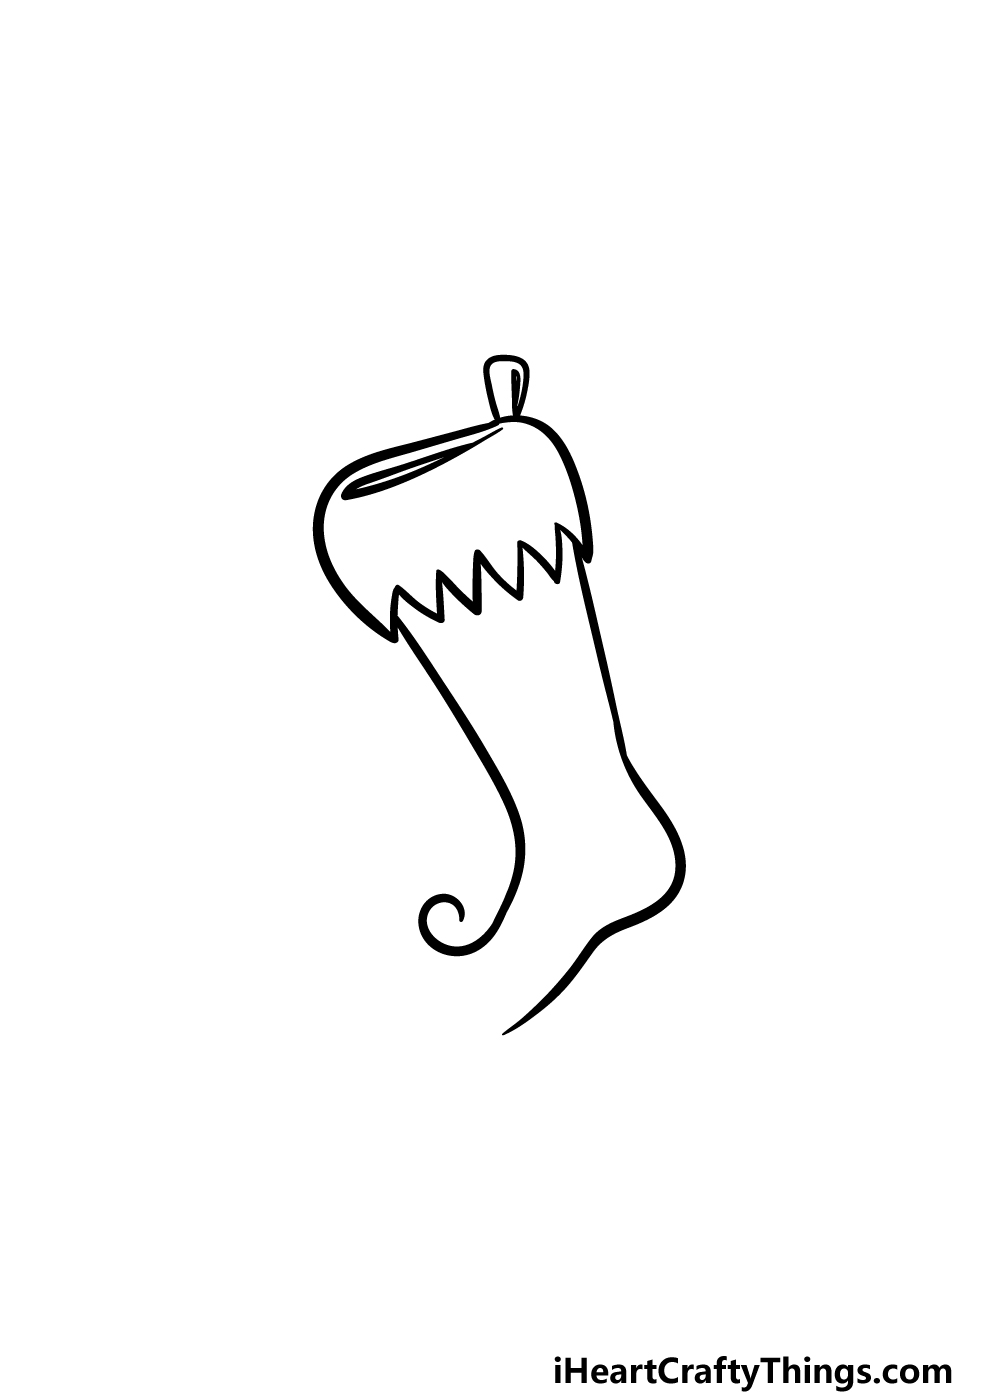 how to draw a Stocking step 3